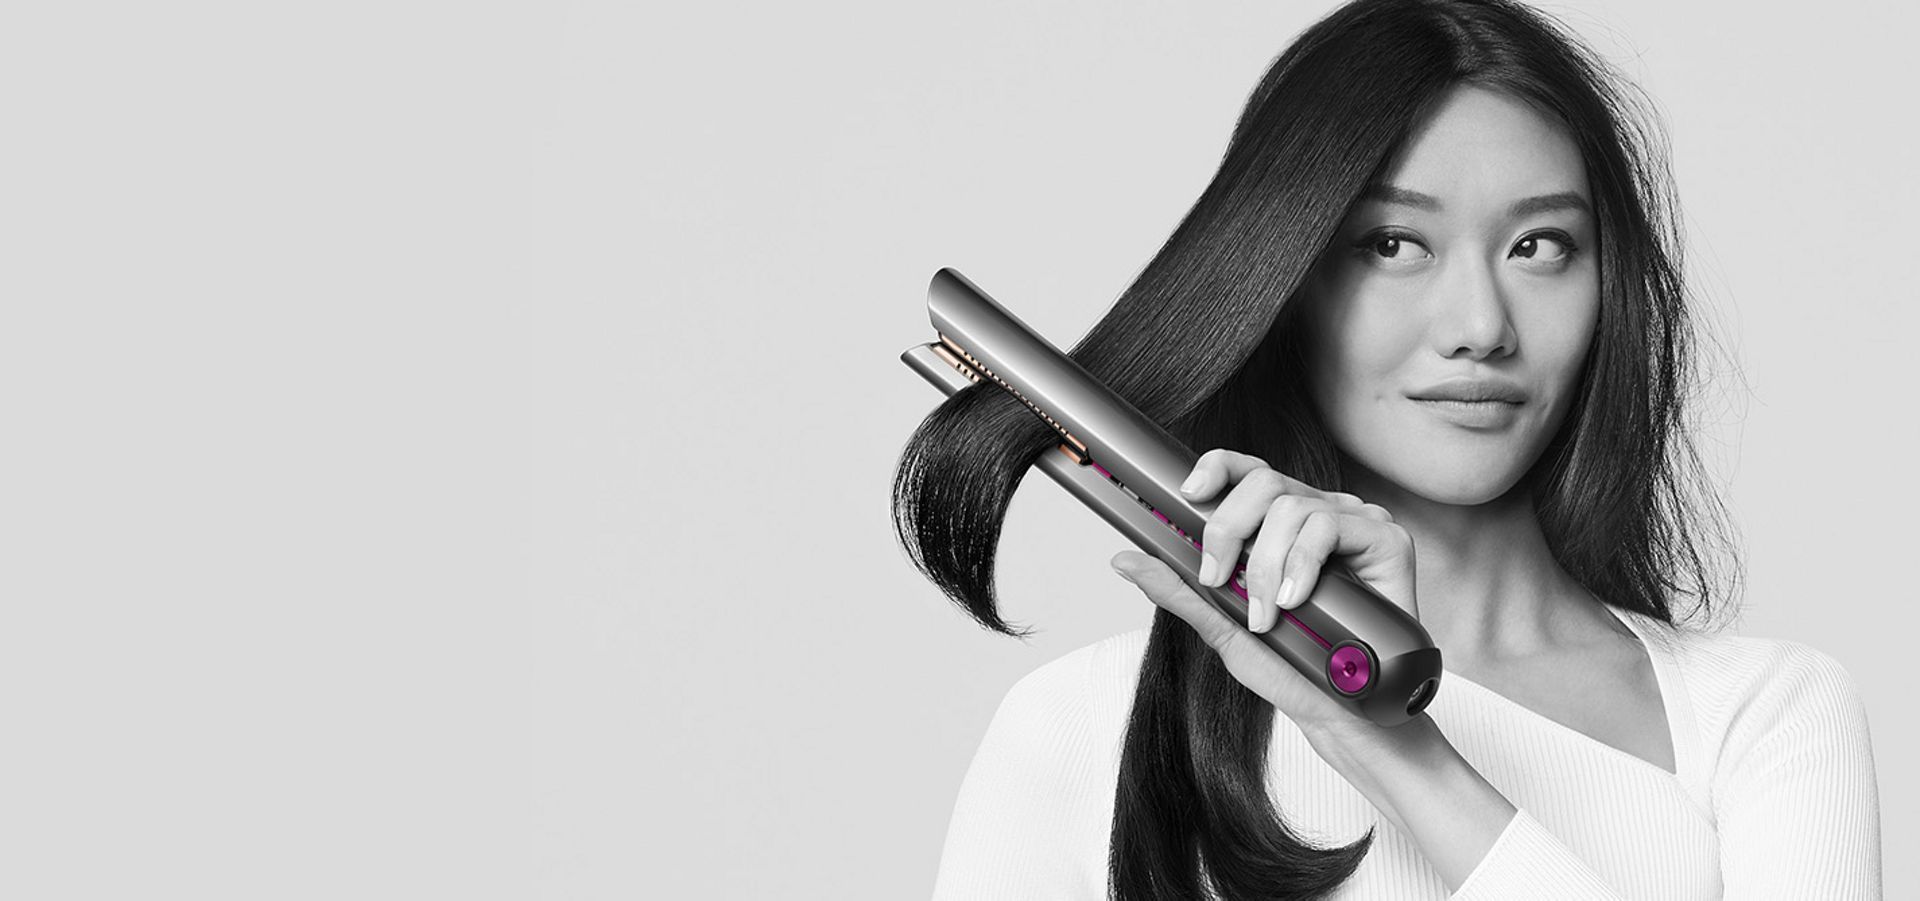 Dyson’s New Hair Straightener is The (not so) Hot Hair Tool You Need for Healthier Hair